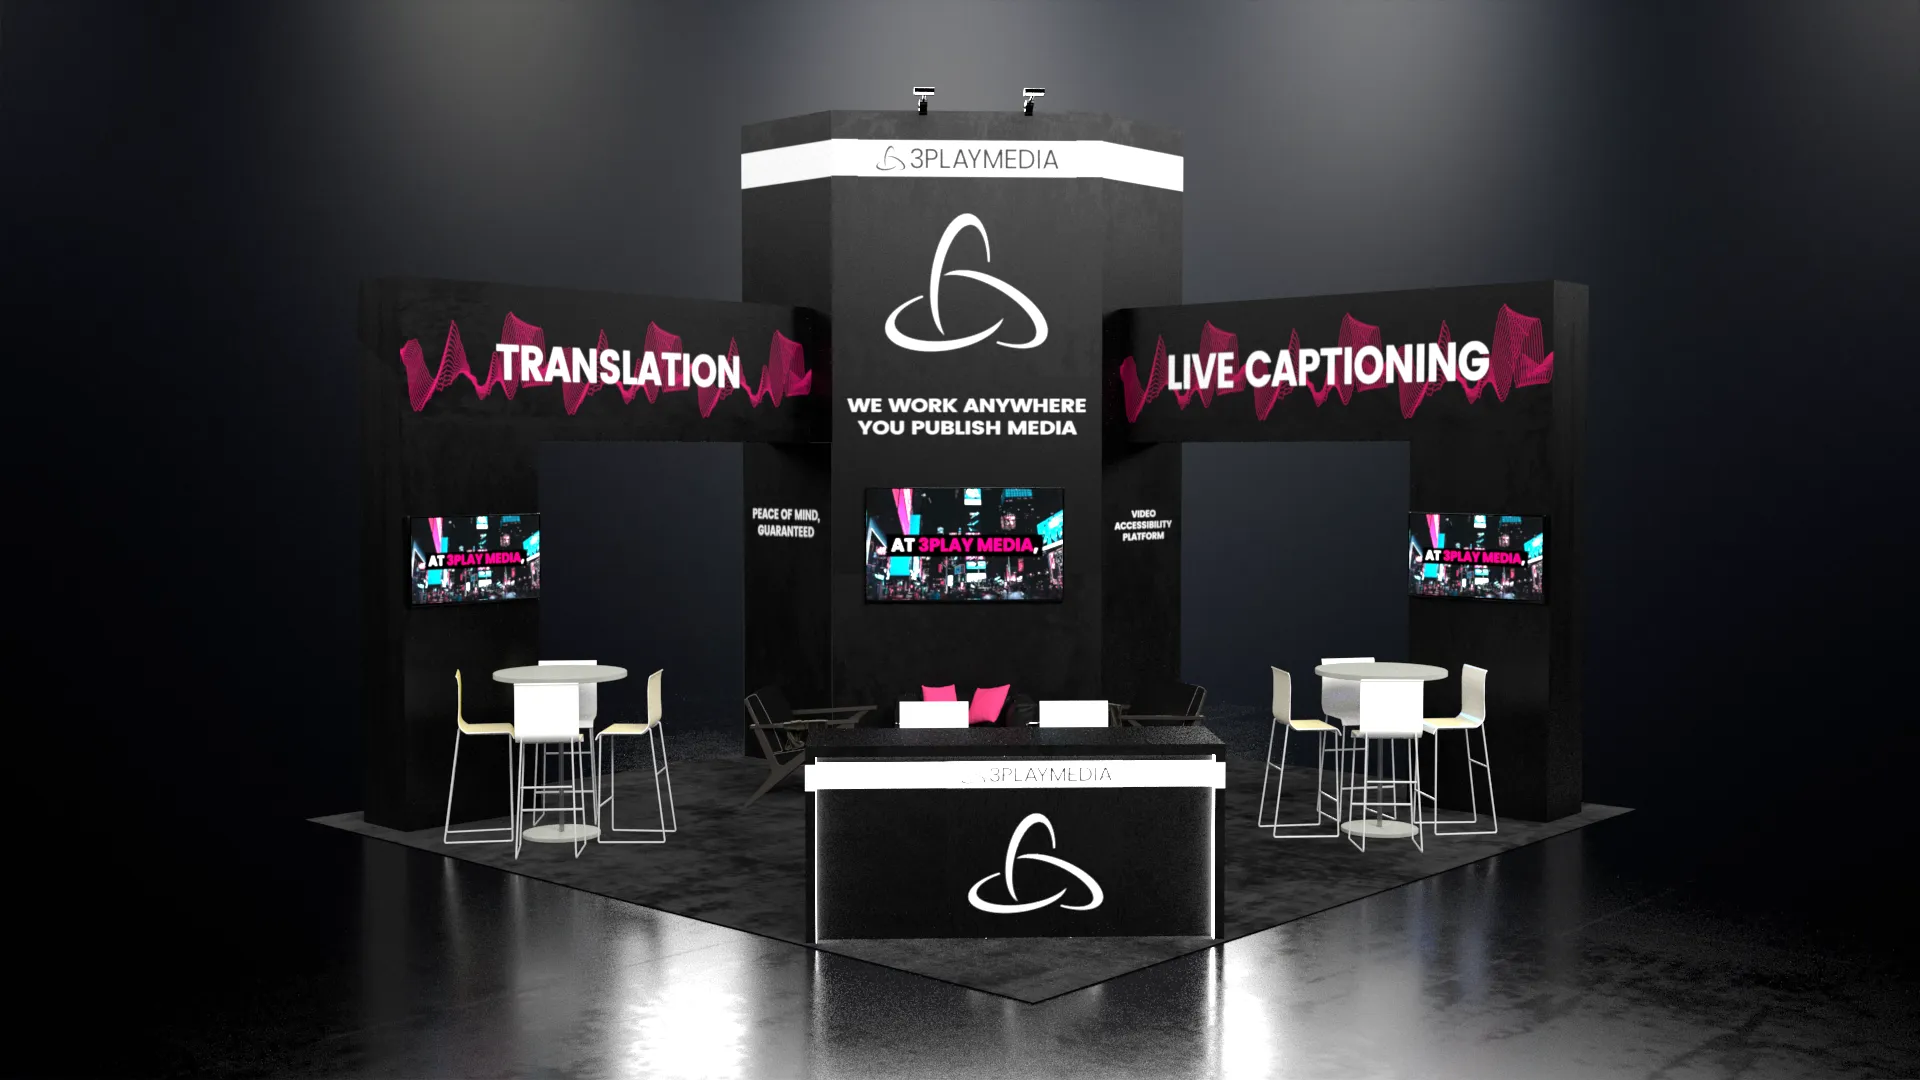 booth-design-projects/The Reaction Space/2024-03-20-20x20-ISLAND-Project-21/3PlayMedia_NAB_2023_20x20_v06_-e2db4p.png